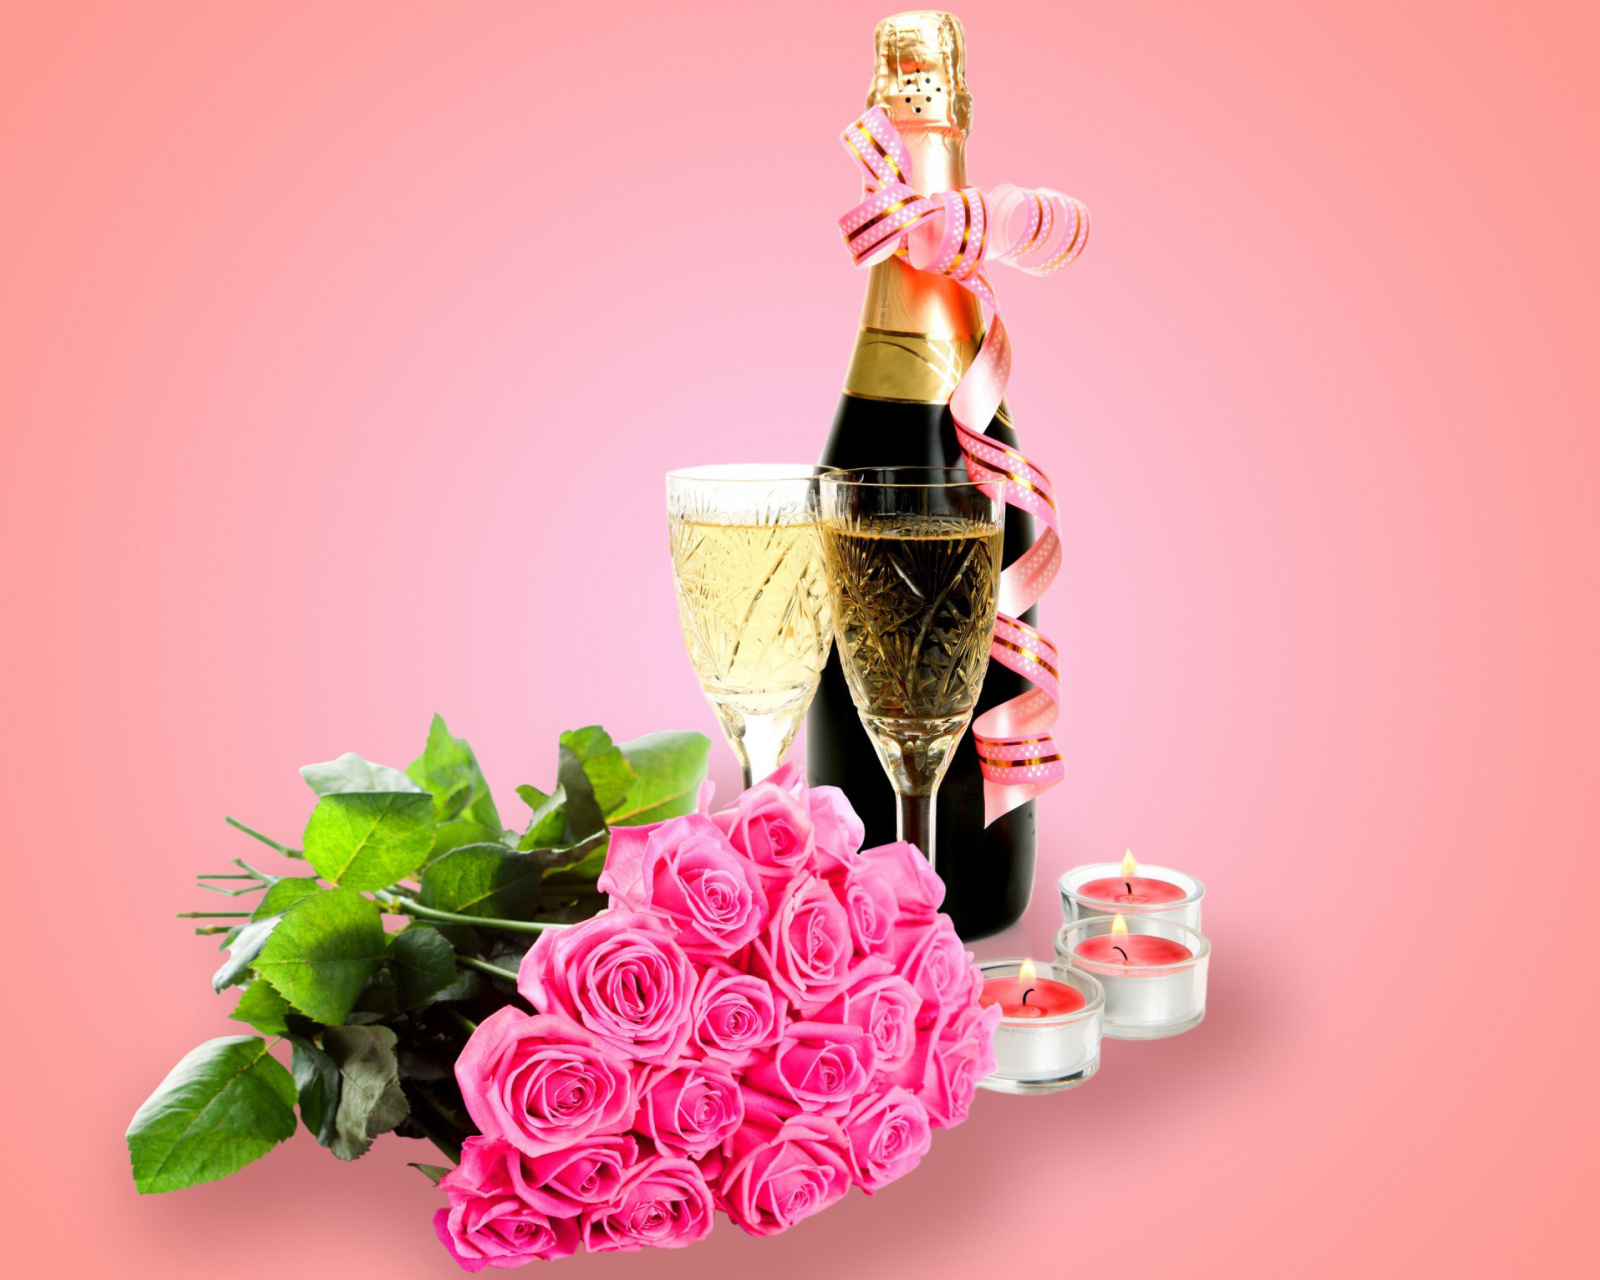 Clipart Roses Bouquet and Champagne screenshot #1 1600x1280